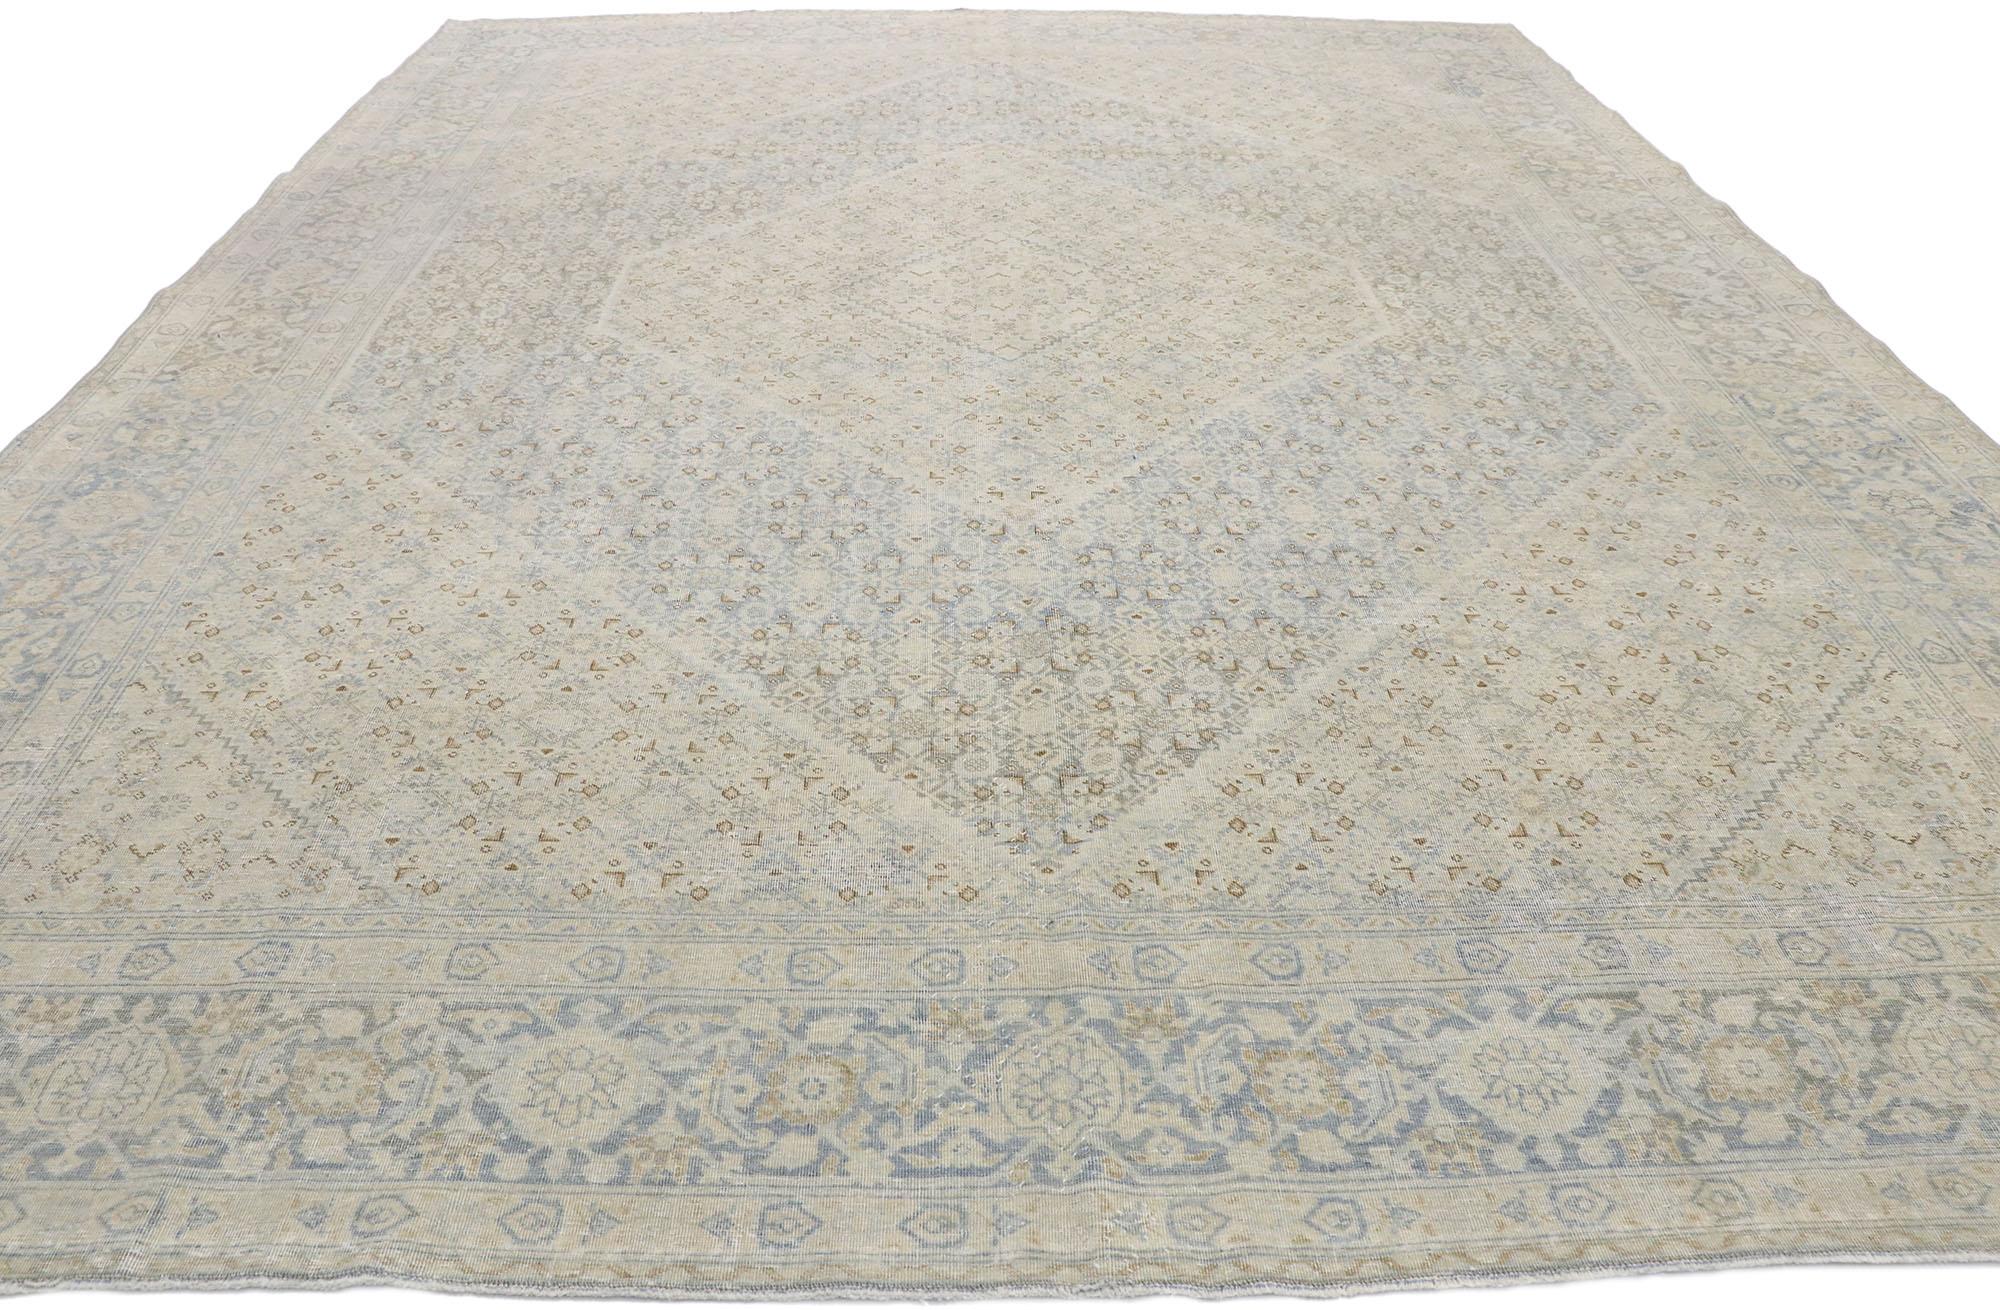 Distressed Vintage Persian Mahi Tabriz Rug with English Country Cottage Style In Distressed Condition For Sale In Dallas, TX